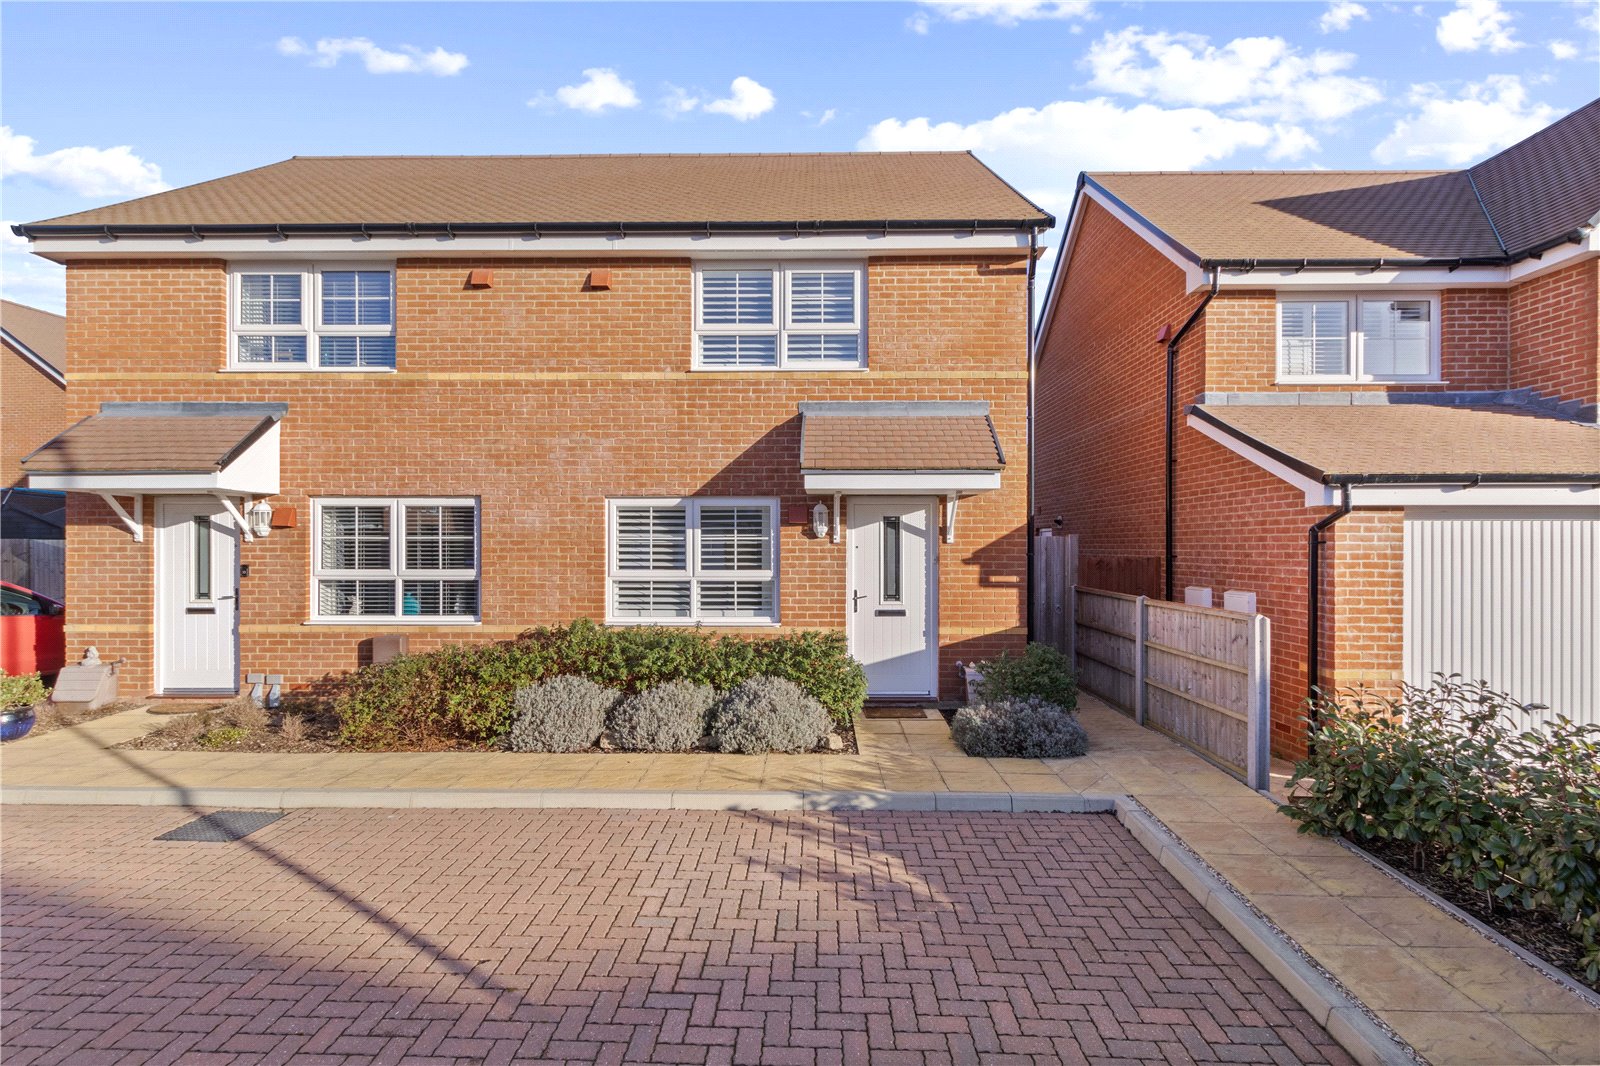 2 bed house for sale in Arundell Way, Westhampnett  - Property Image 1